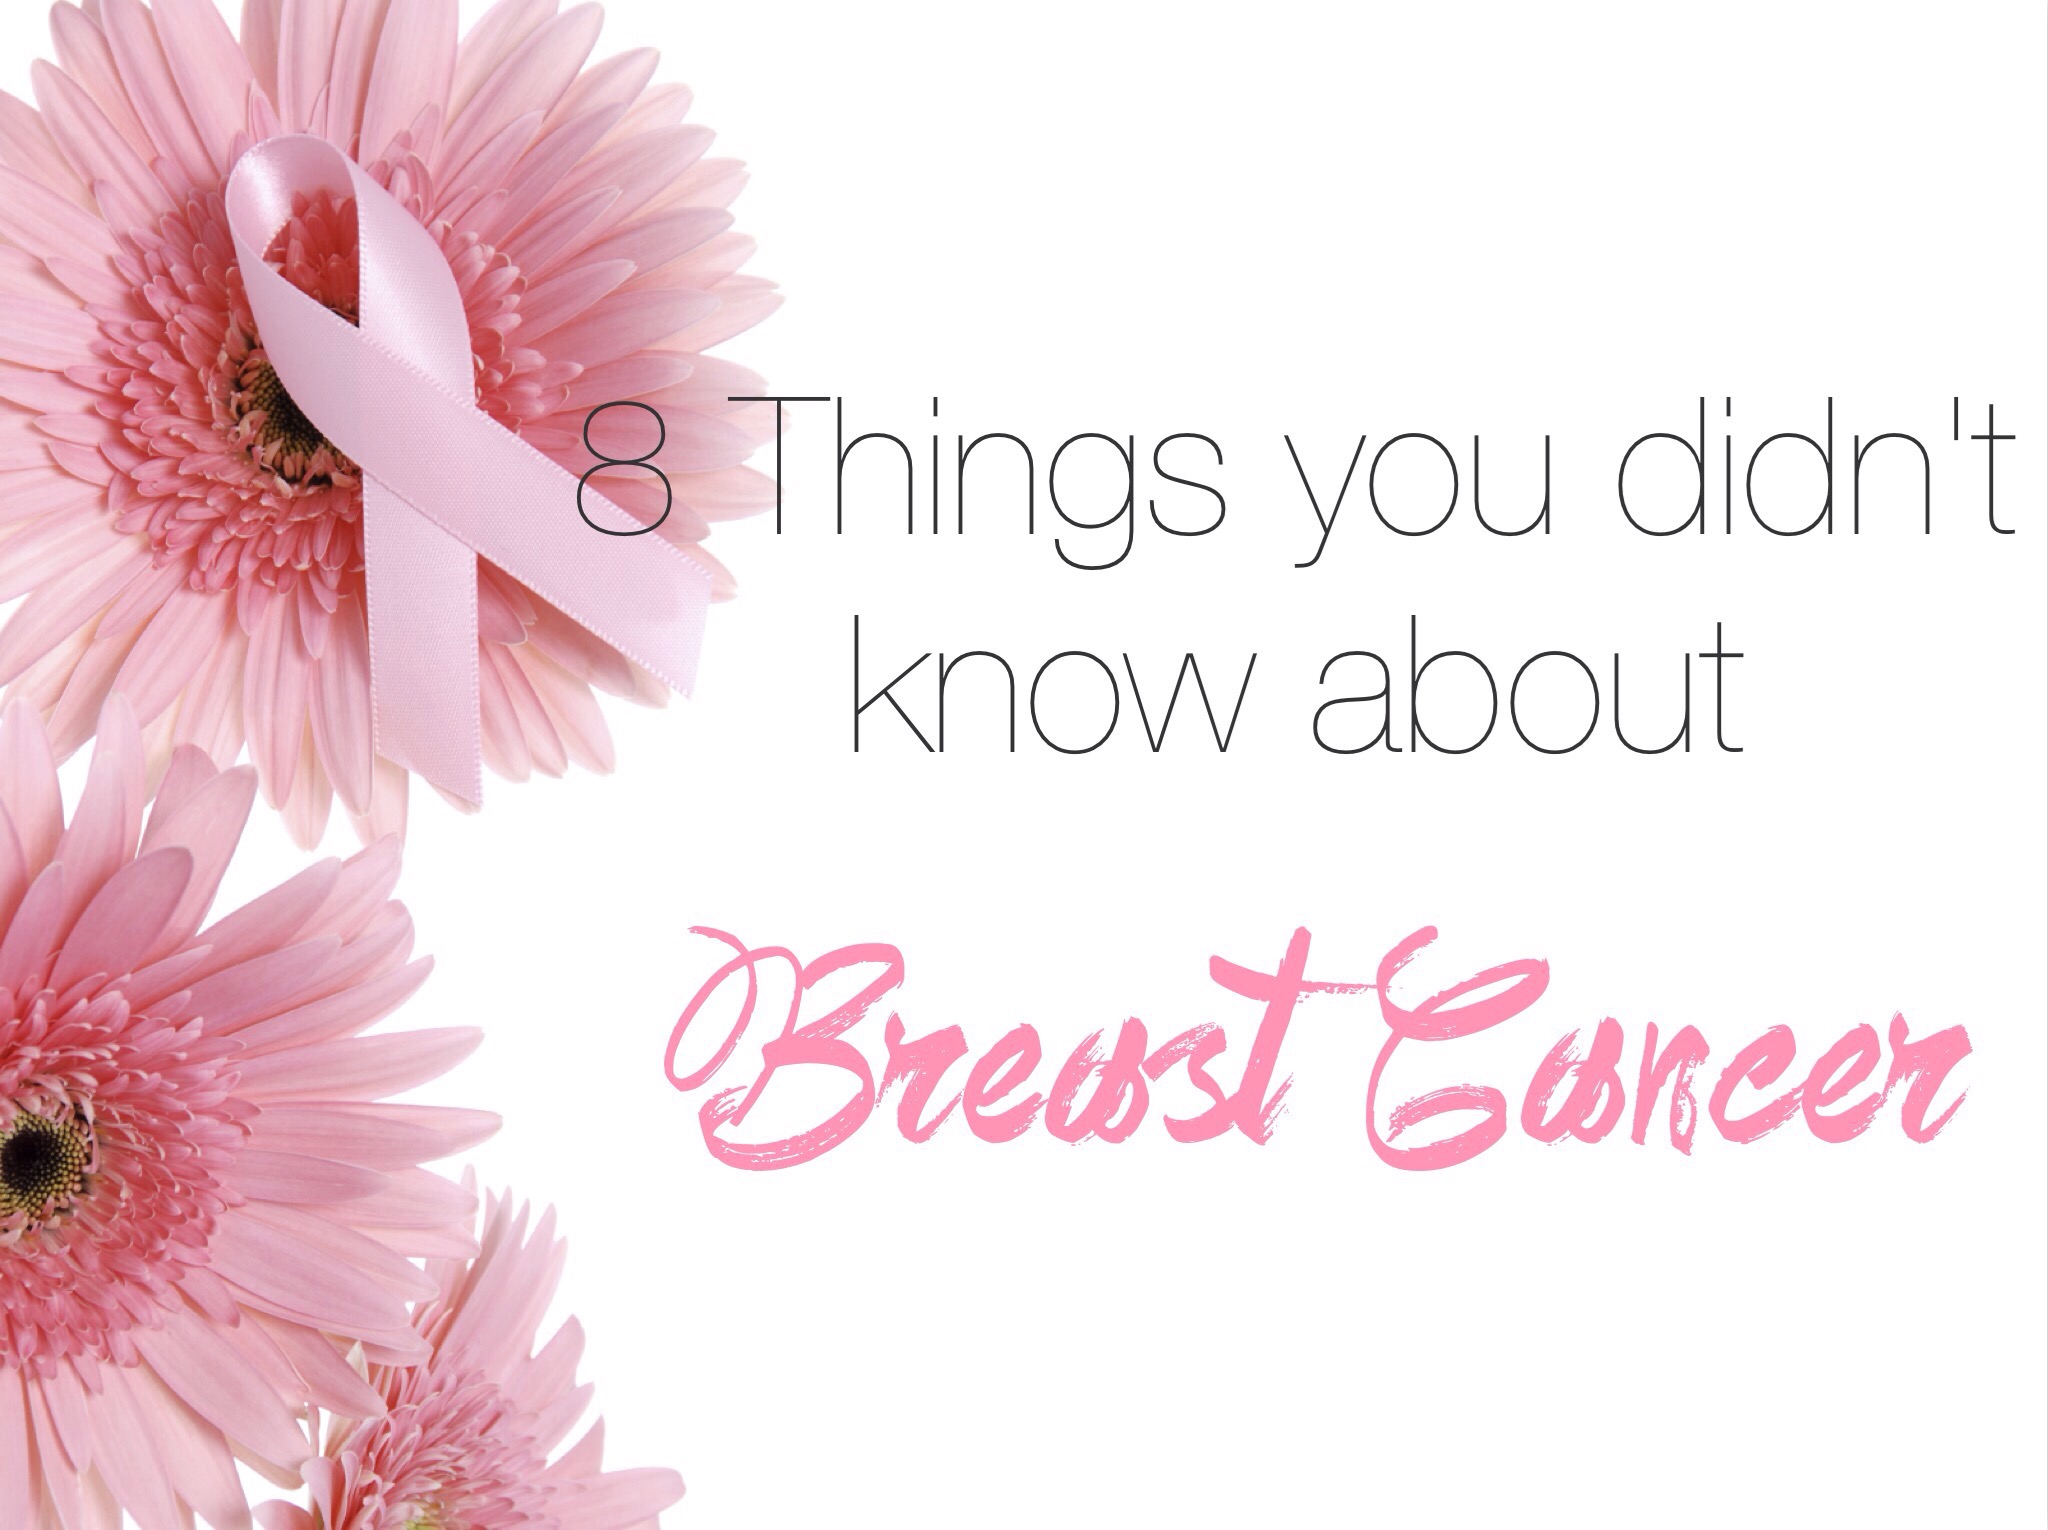 breast cancer awareness month, things you didn't know about breast cancer, best breast cancer blog posts, blogs about breast cancer